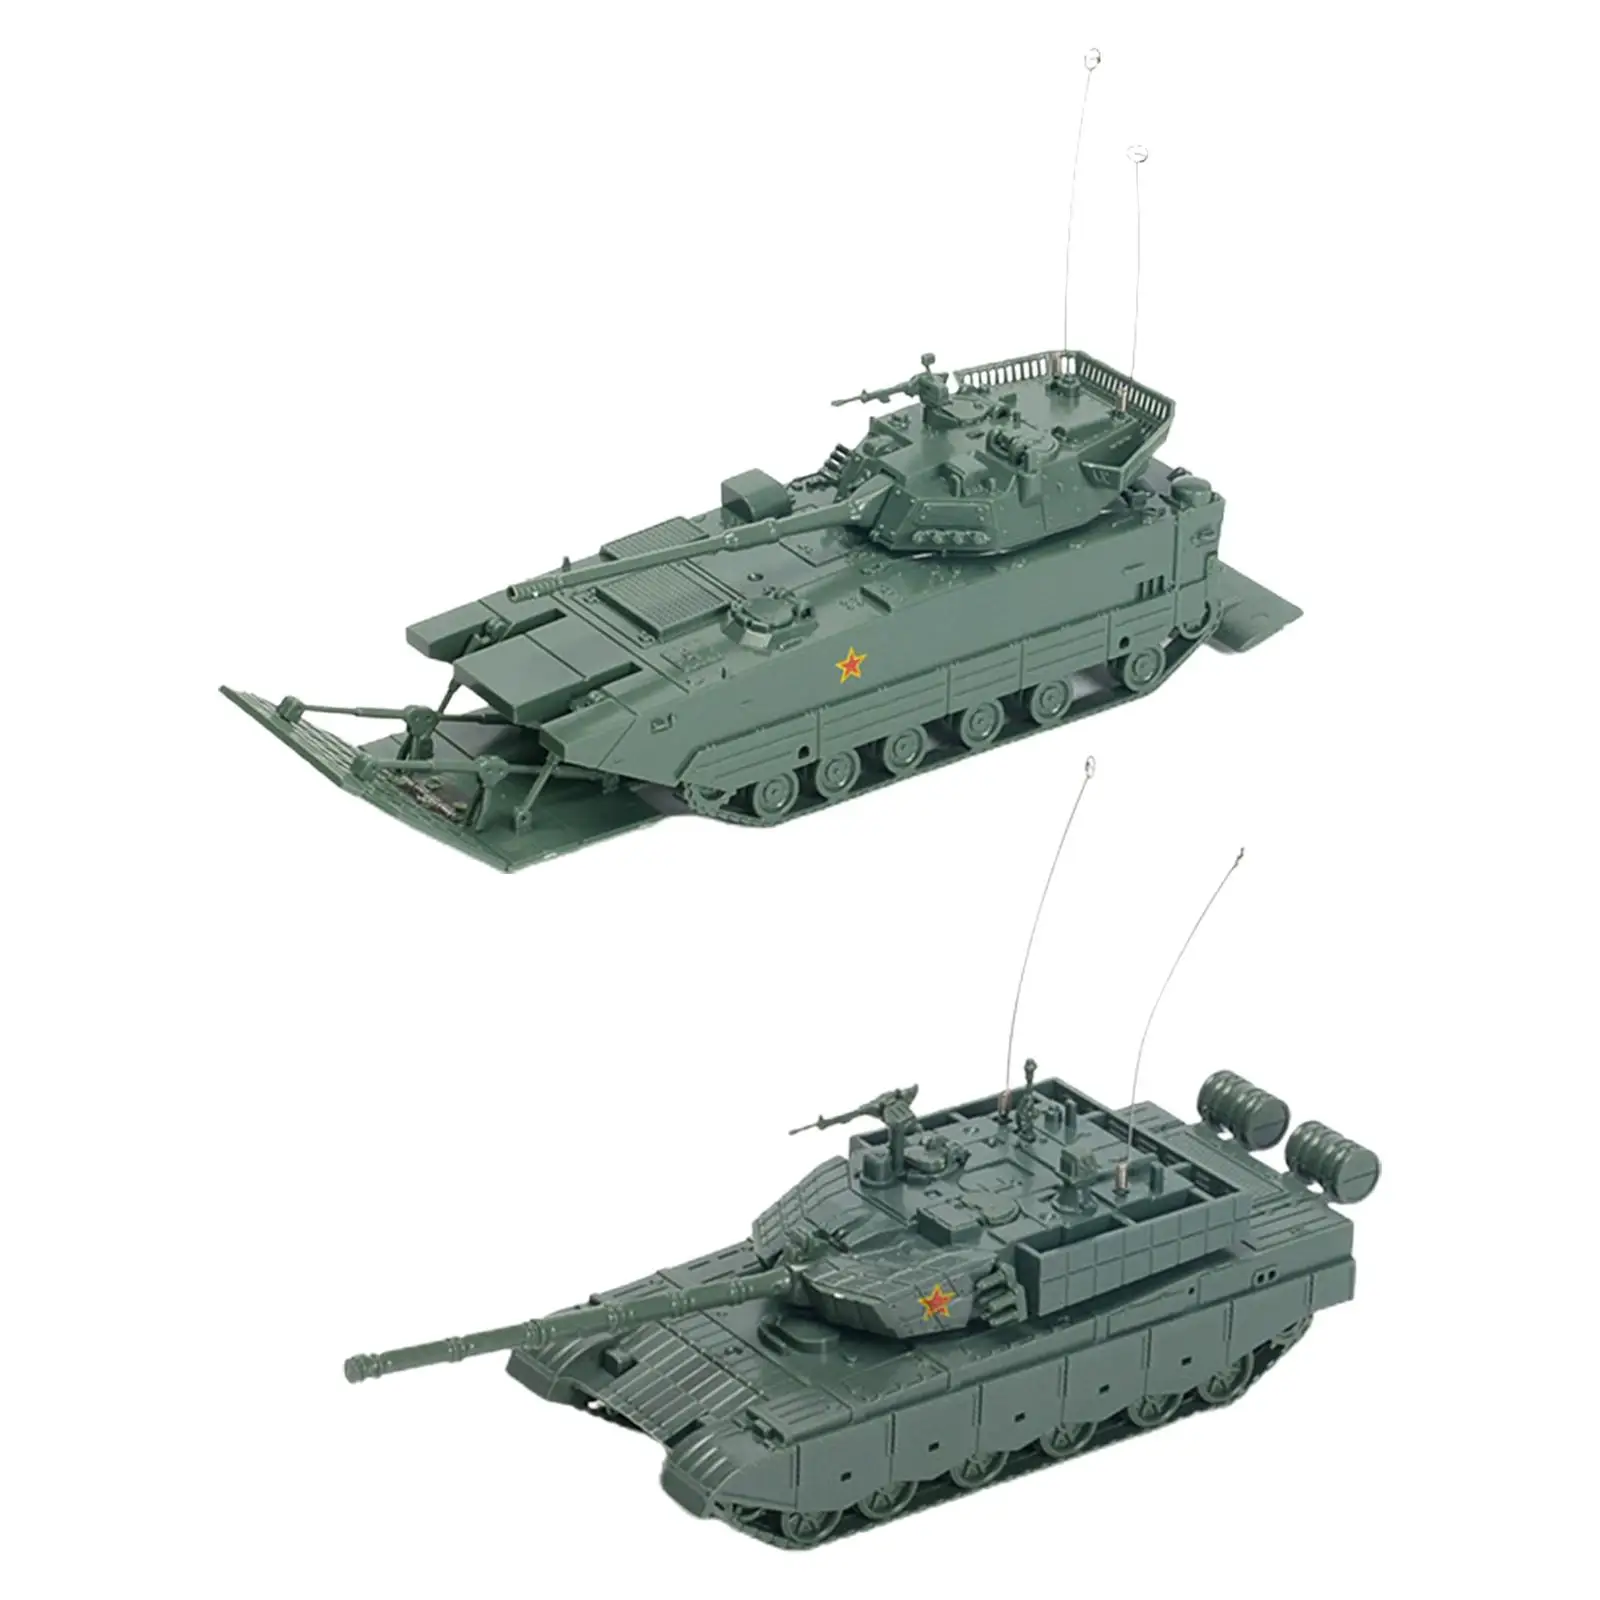 1/72 Puzzles Miniature Assembled Tank Model for Display Adults Collectibles